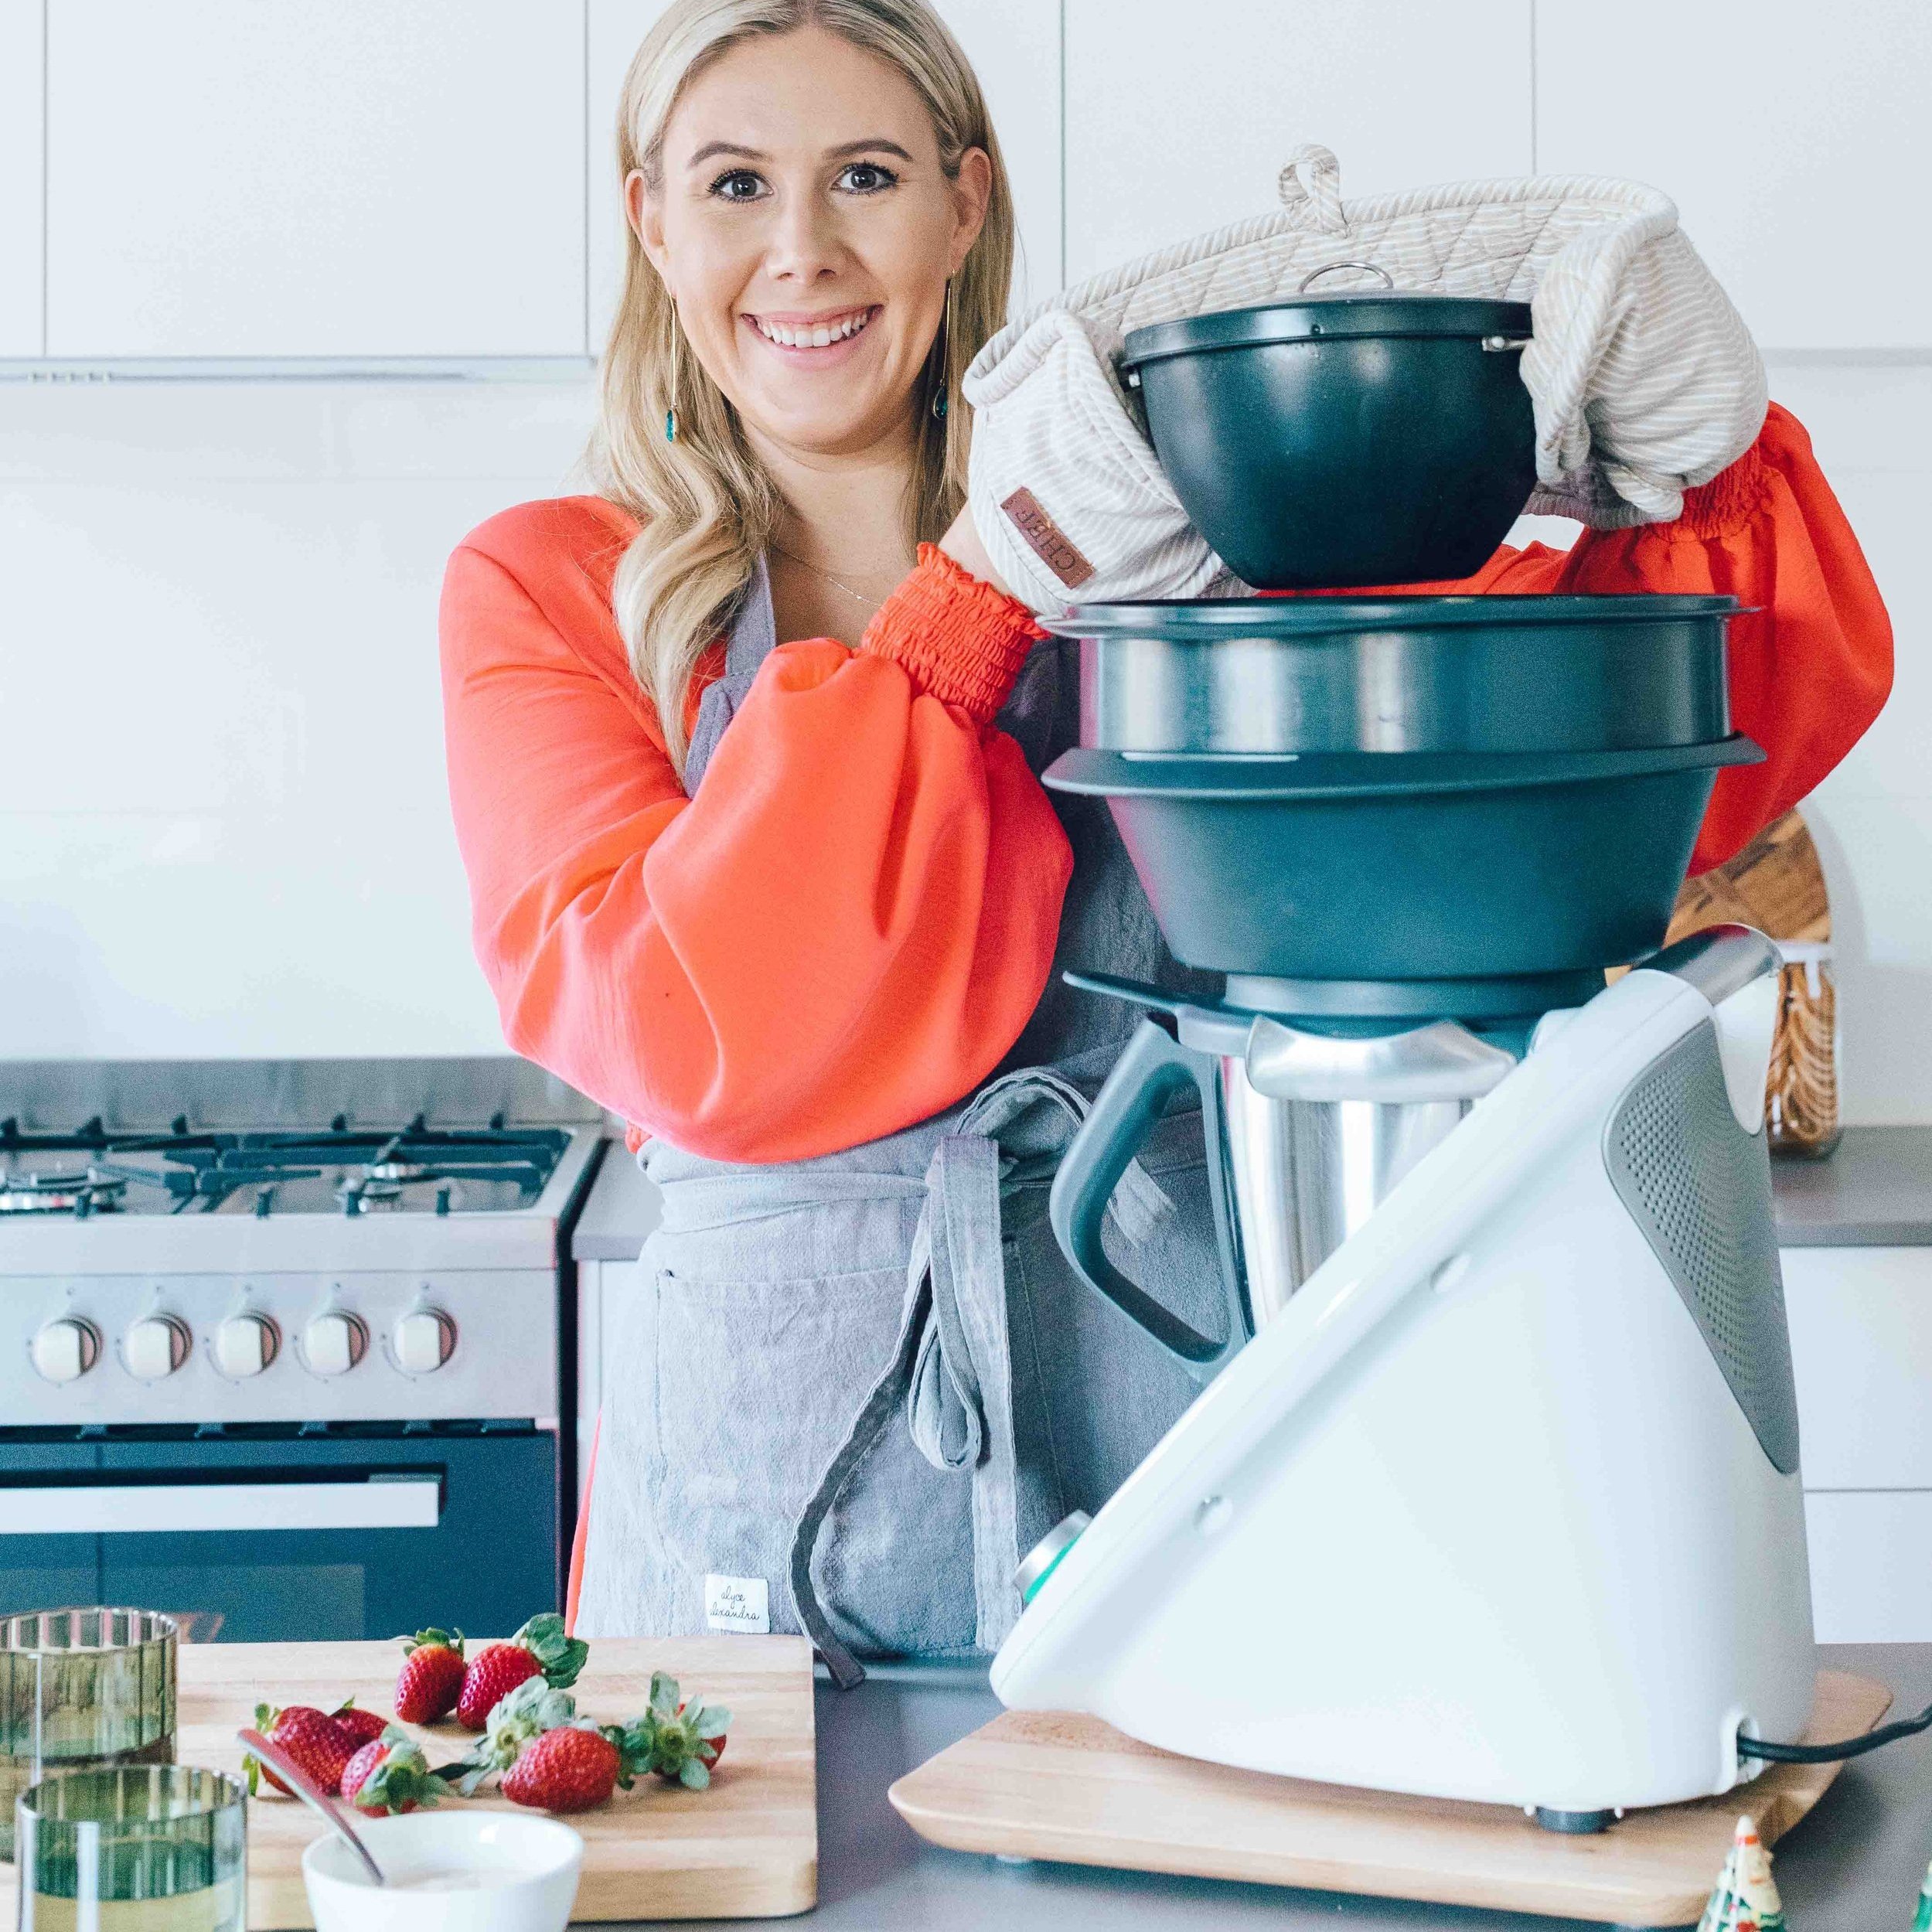 Shop 6.5L Brabantia Slow Cooker | Recommended by alyce alexandra